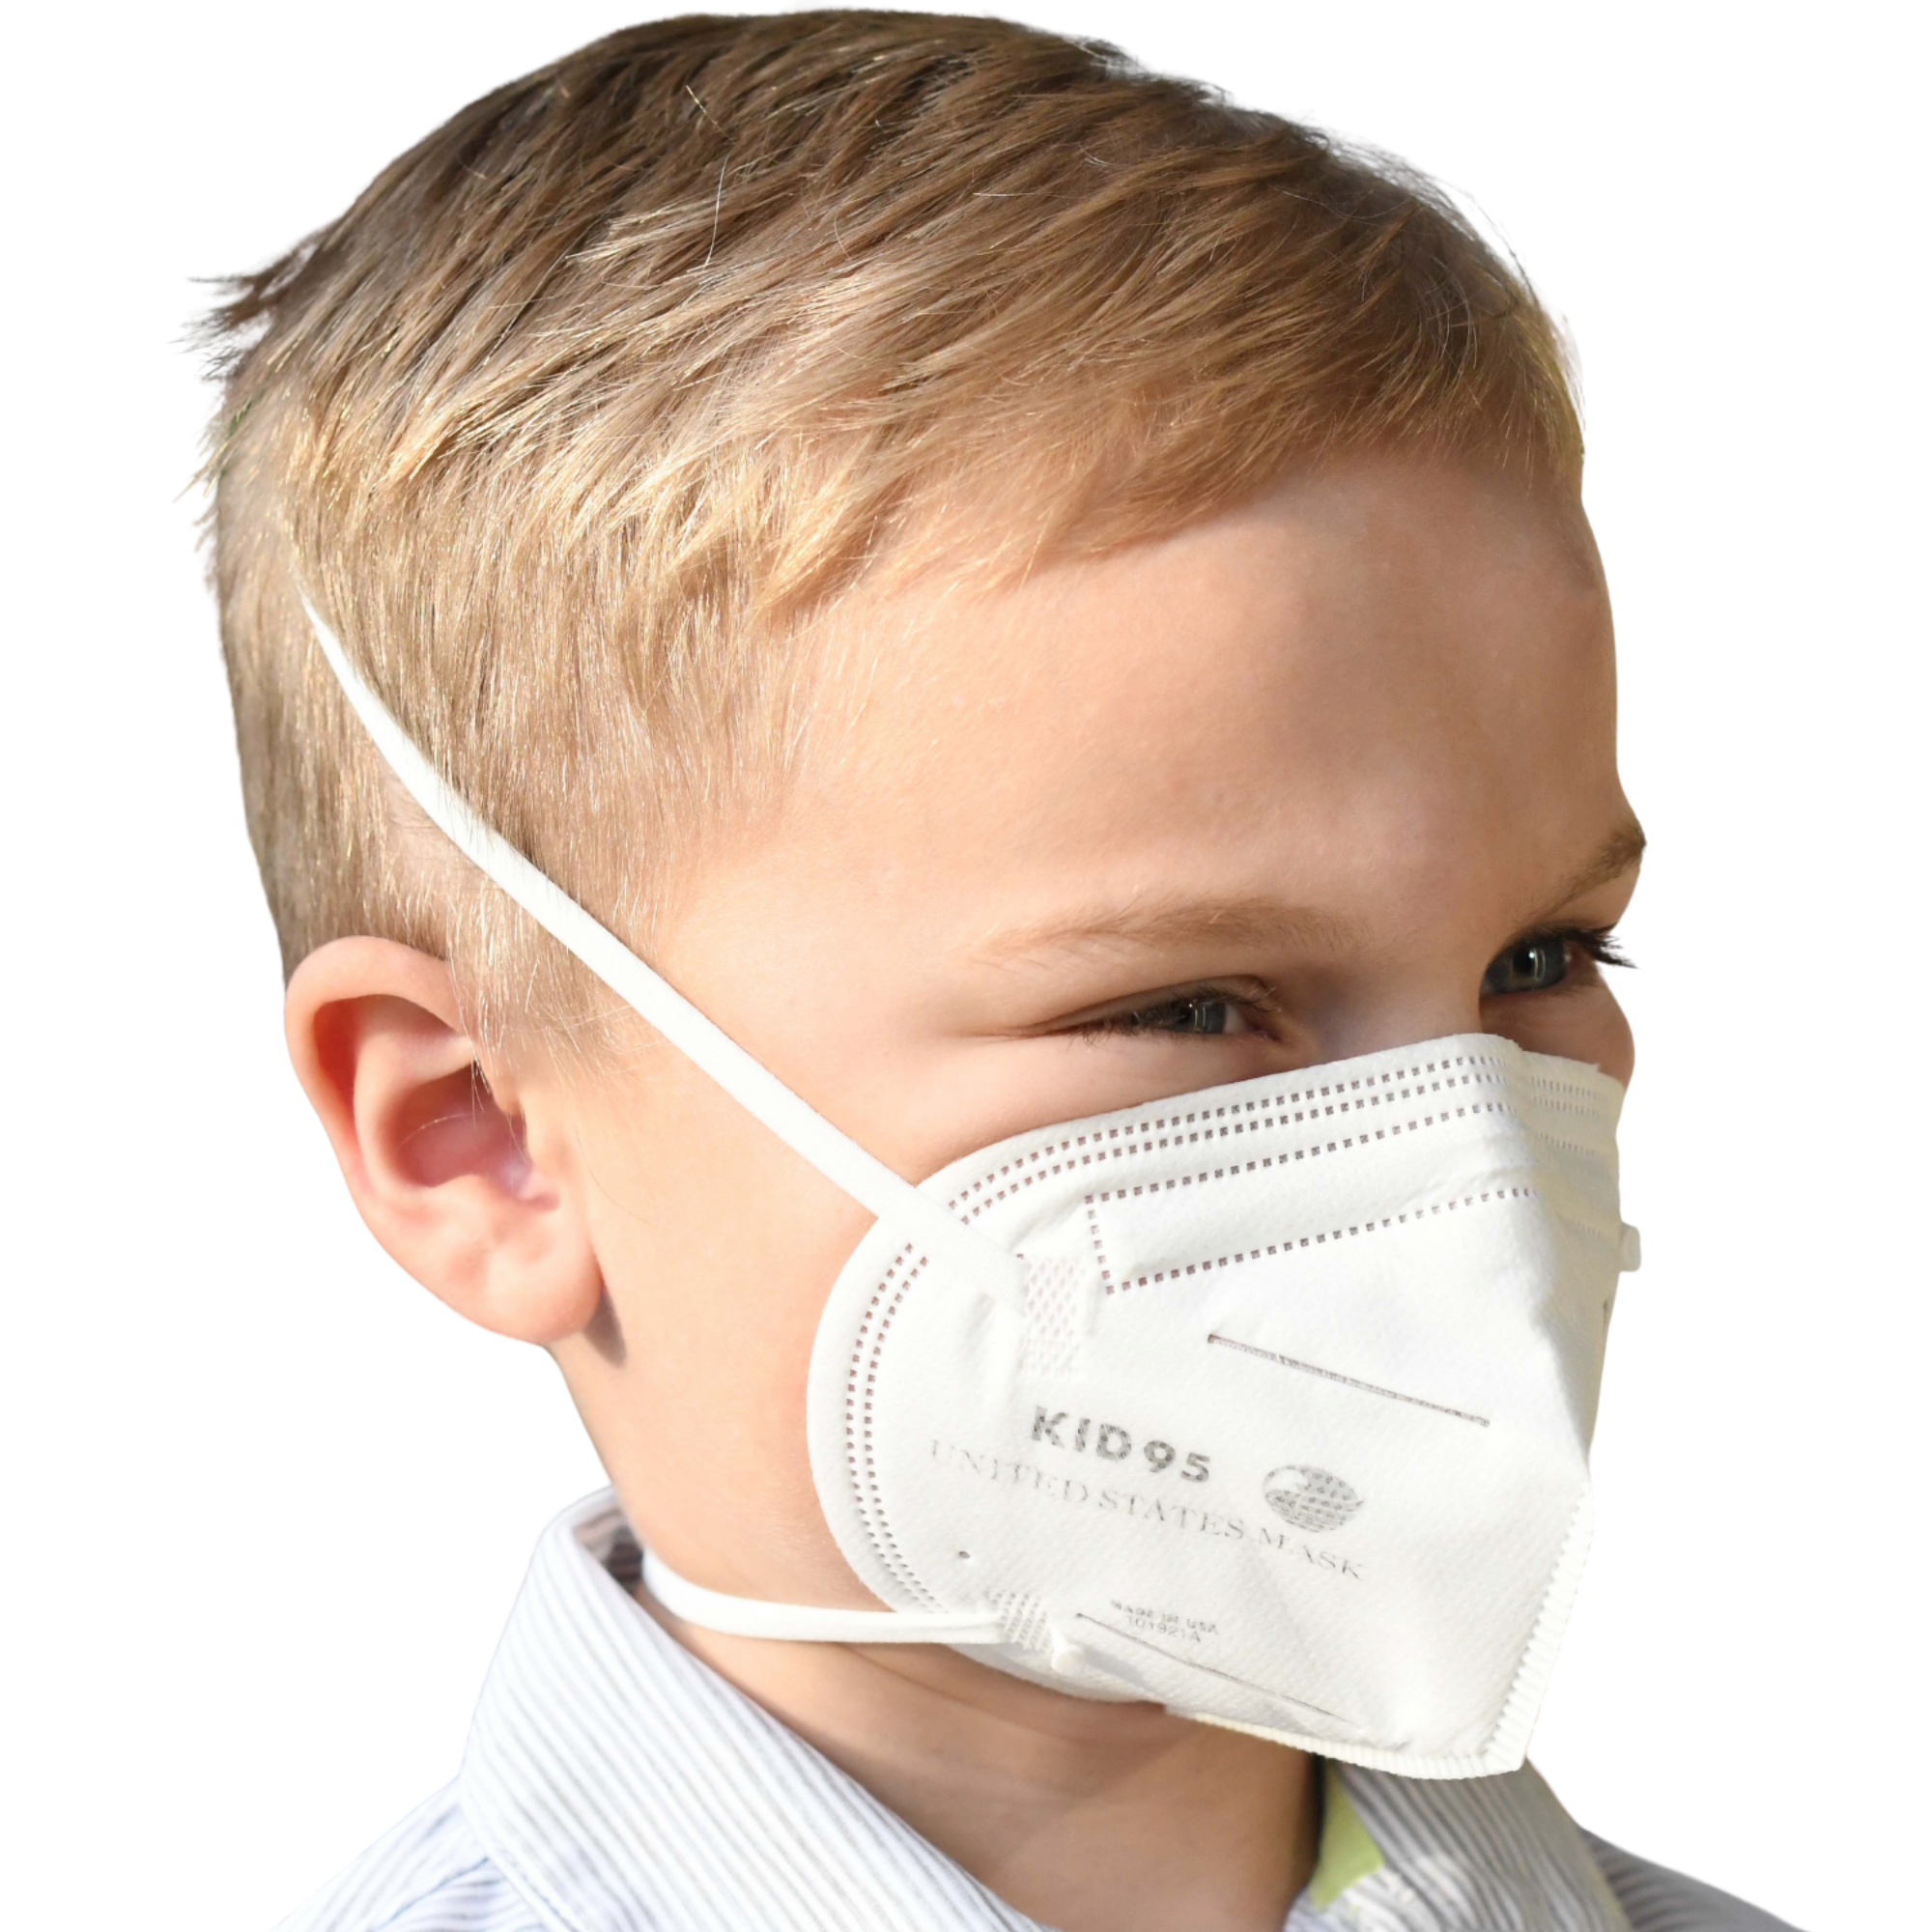 United States Mask Kids95 White High-Filtration Mask Front View Model